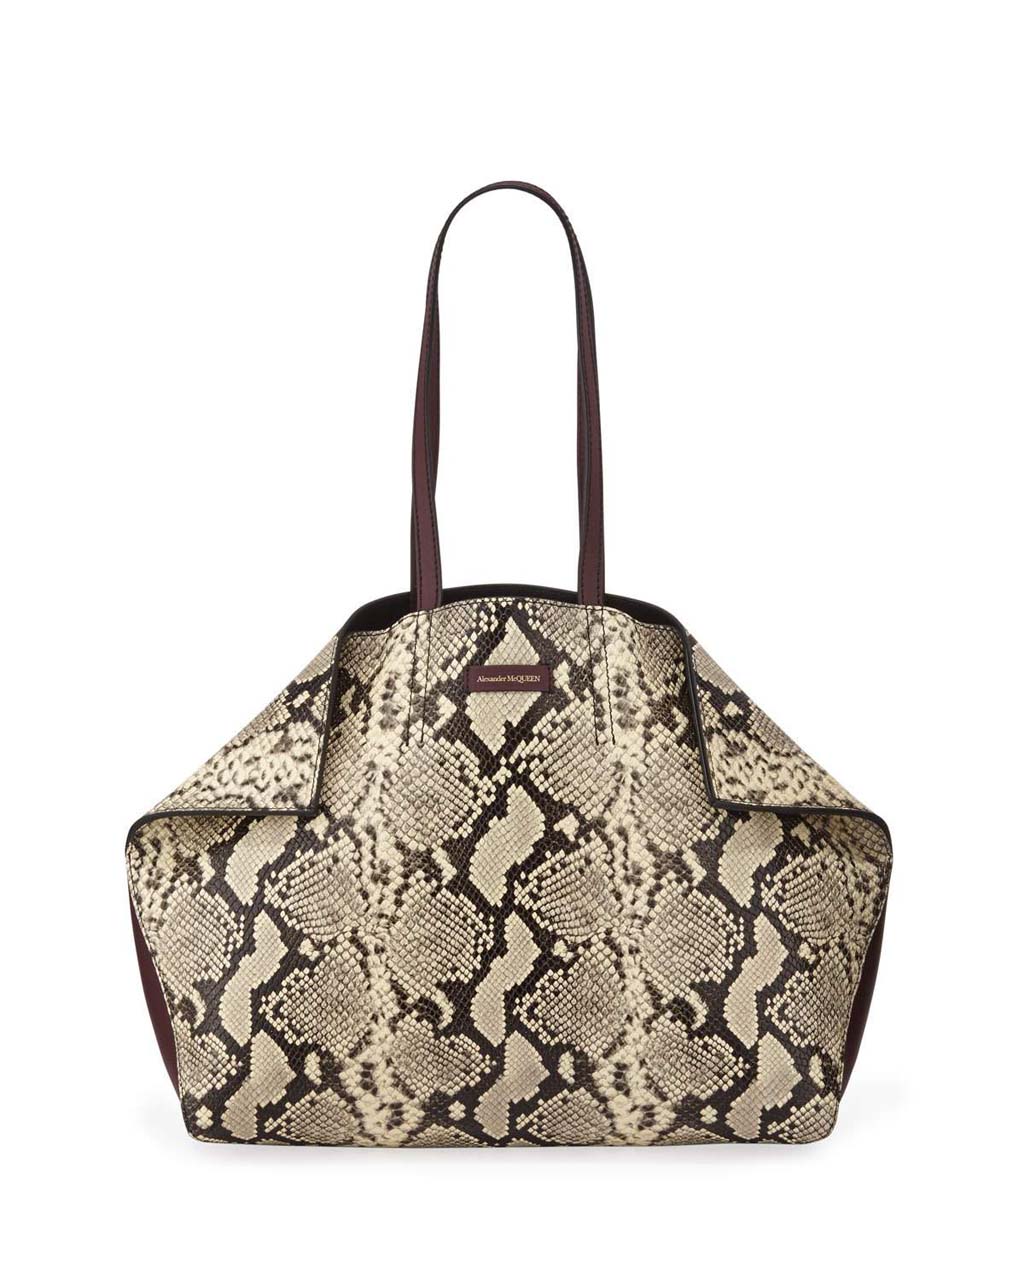 Alexander McQueen Large Butterfly Snake-Print Leather Tote Bag